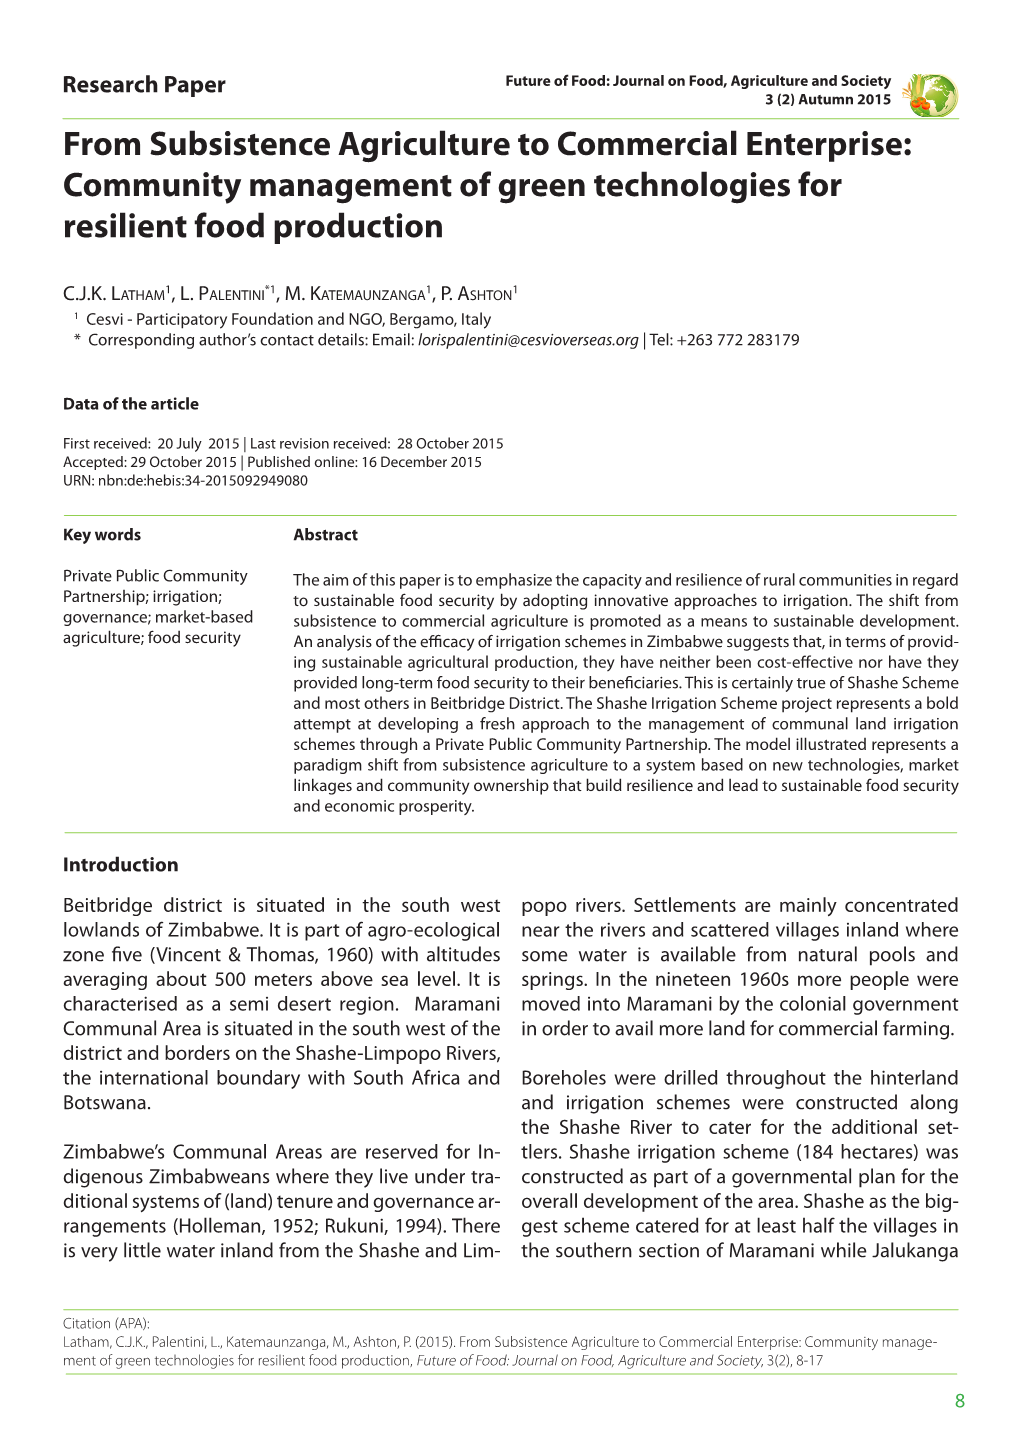 From Subsistence Agriculture to Commercial Enterprise: Community Management of Green Technologies for Resilient Food Production